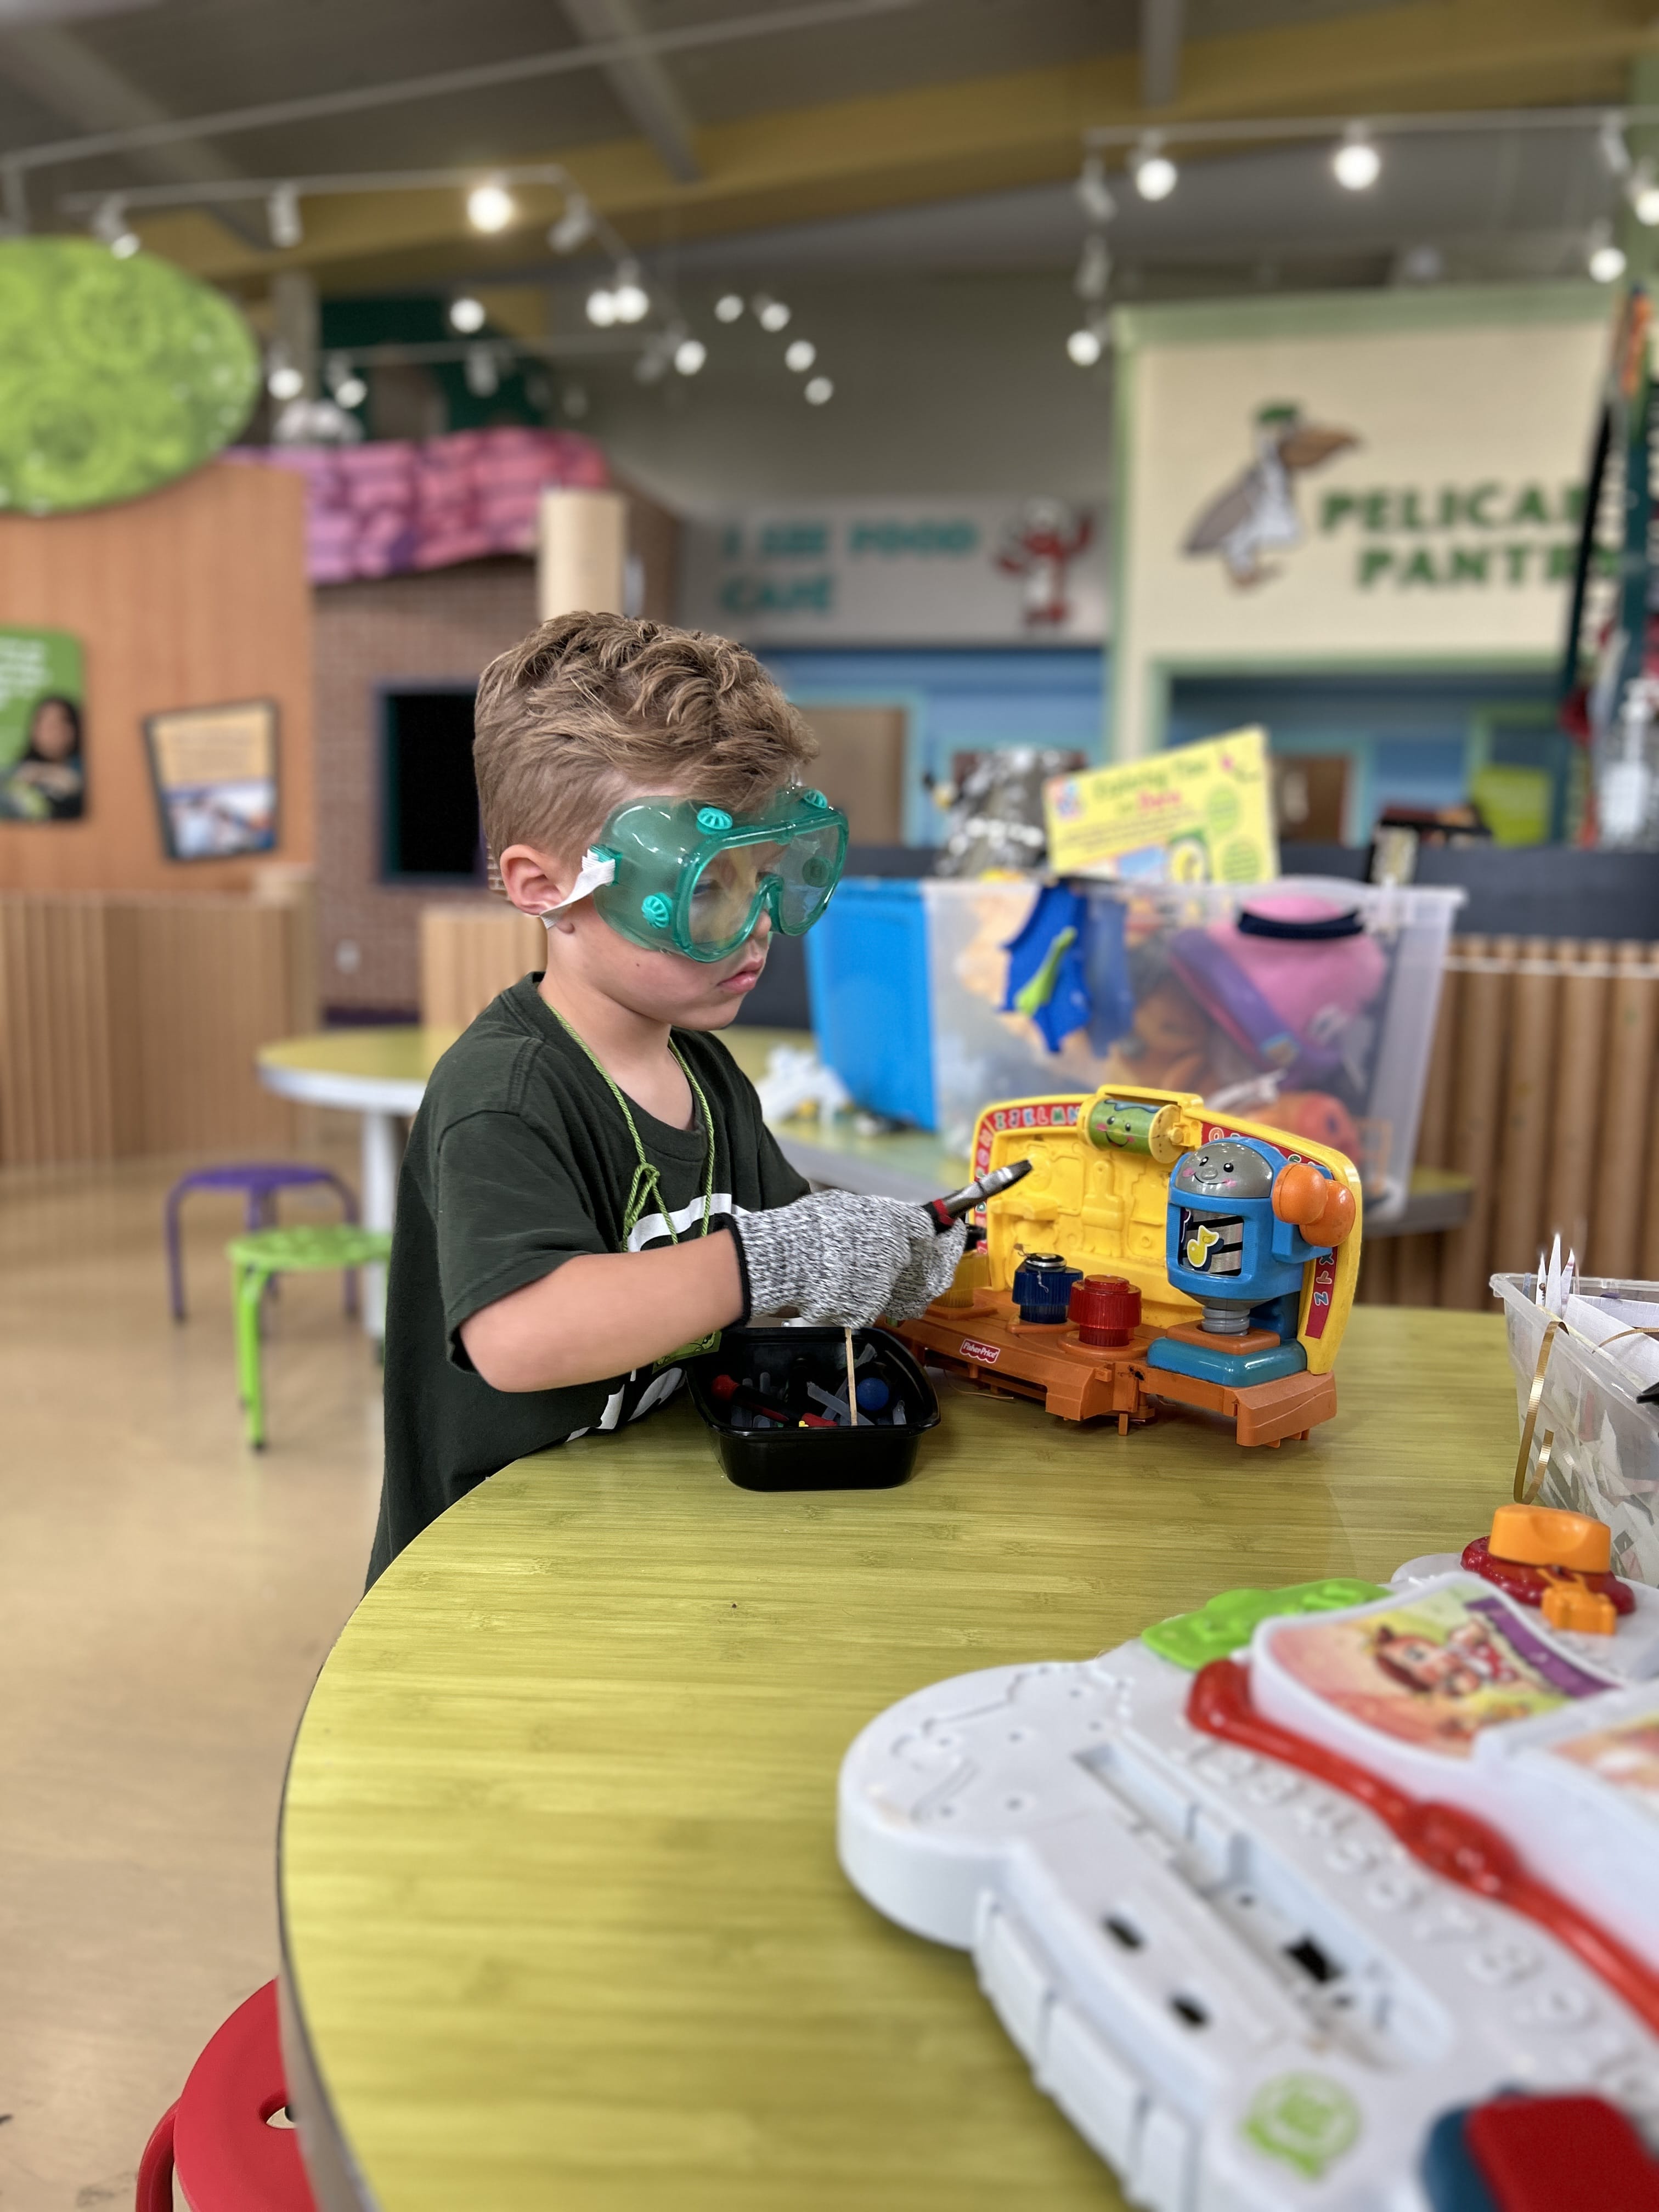 Young boy wearing goggles and gloves working on a toy.